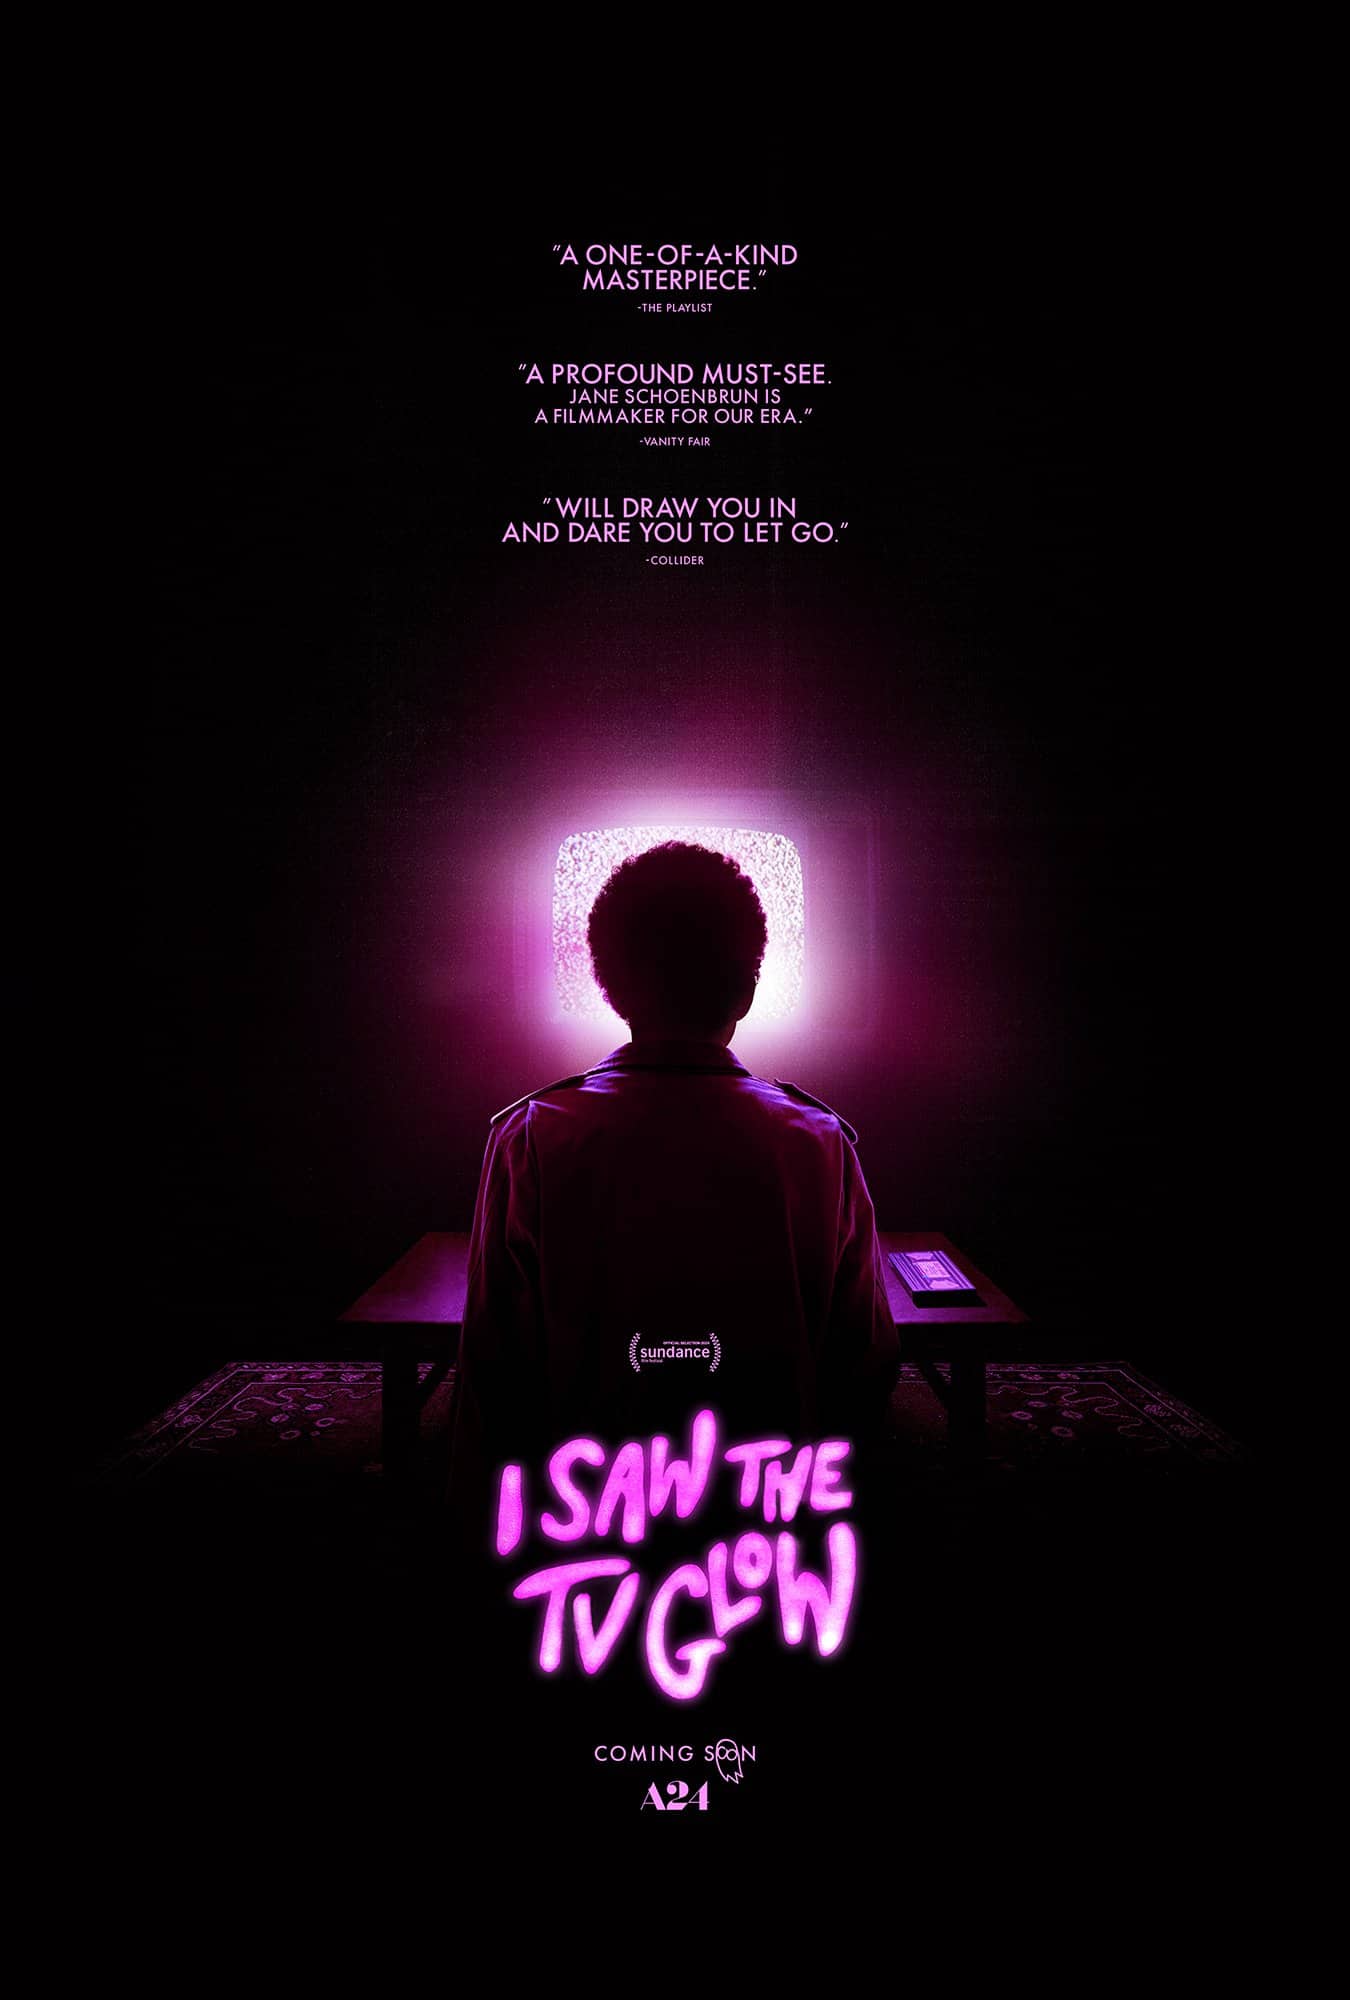 A24 unveils a poster for I Saw the TV Glow, trailer is coming tomorrow